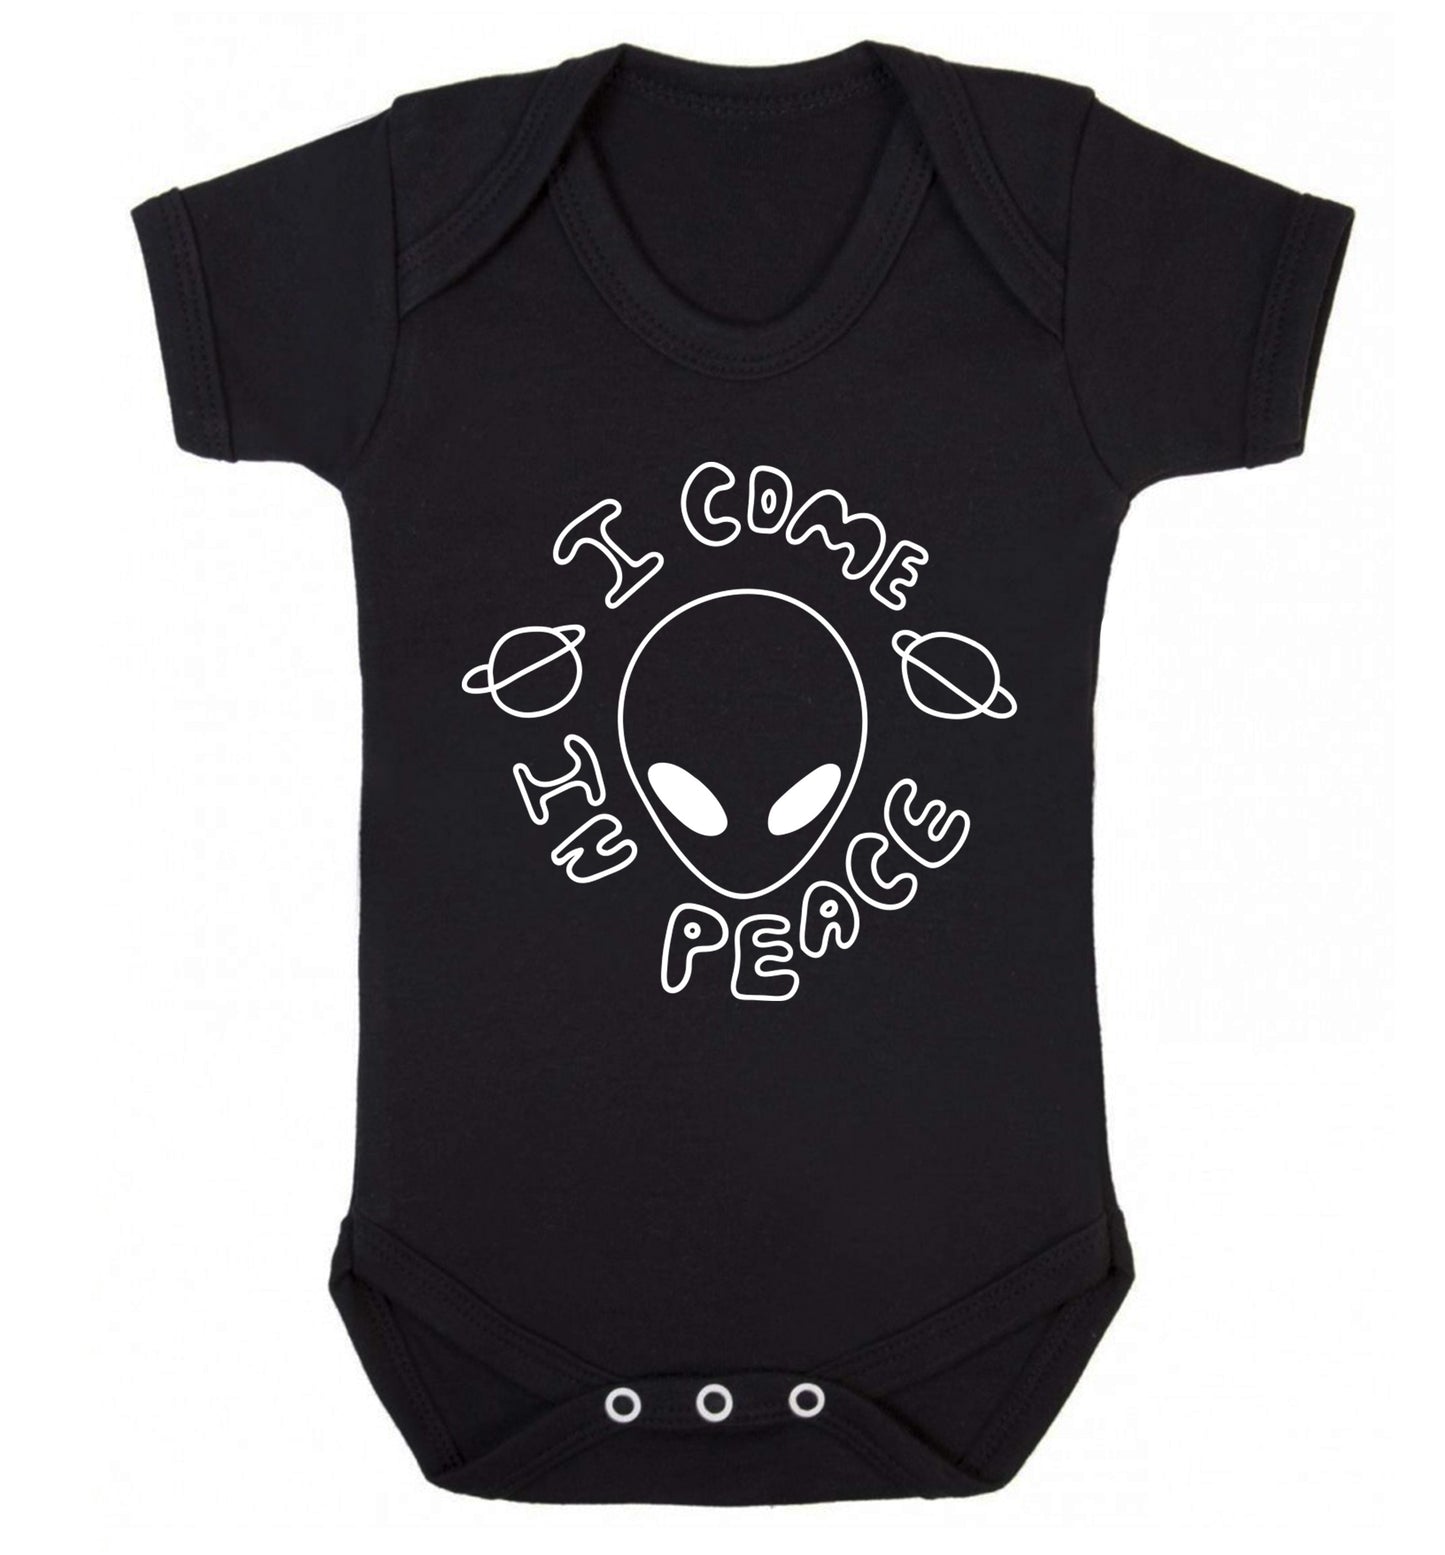 I come in peace Baby Vest black 18-24 months